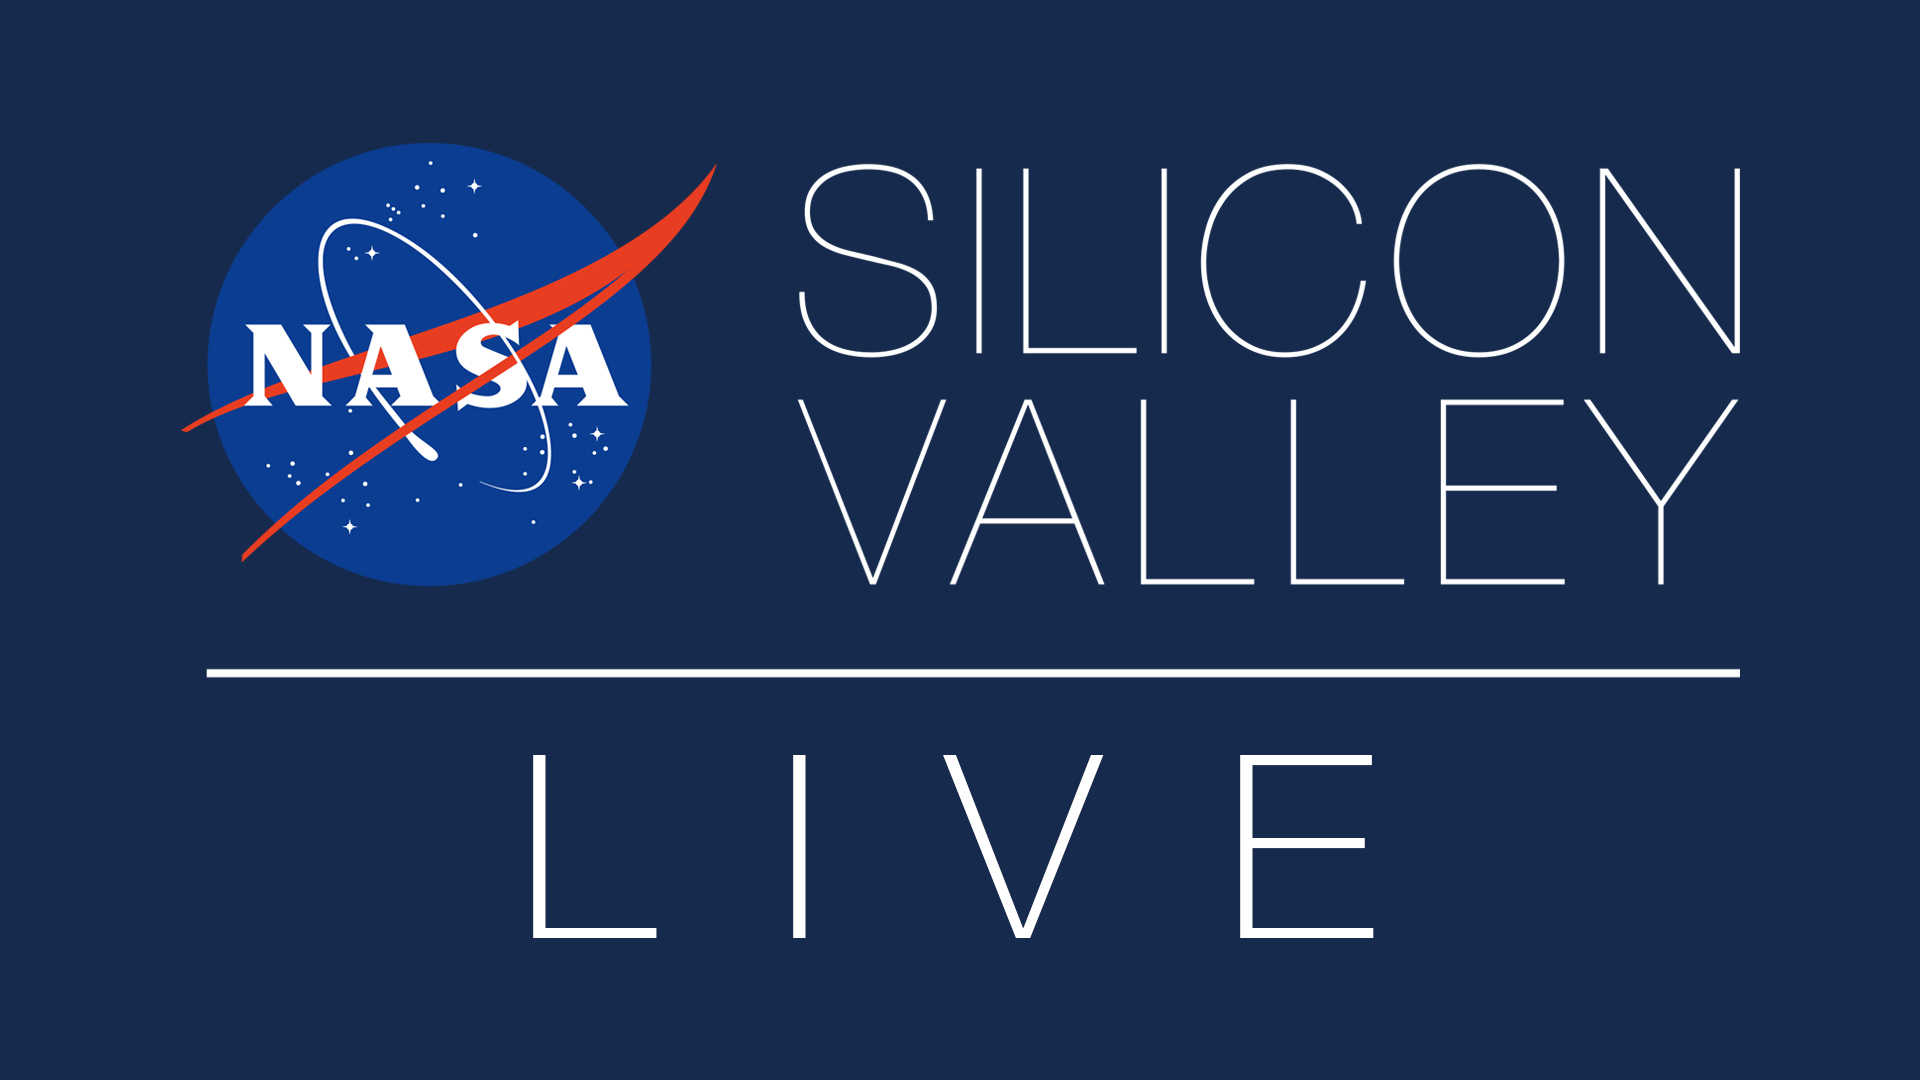 NASA in Silicon Valley Live Graphic